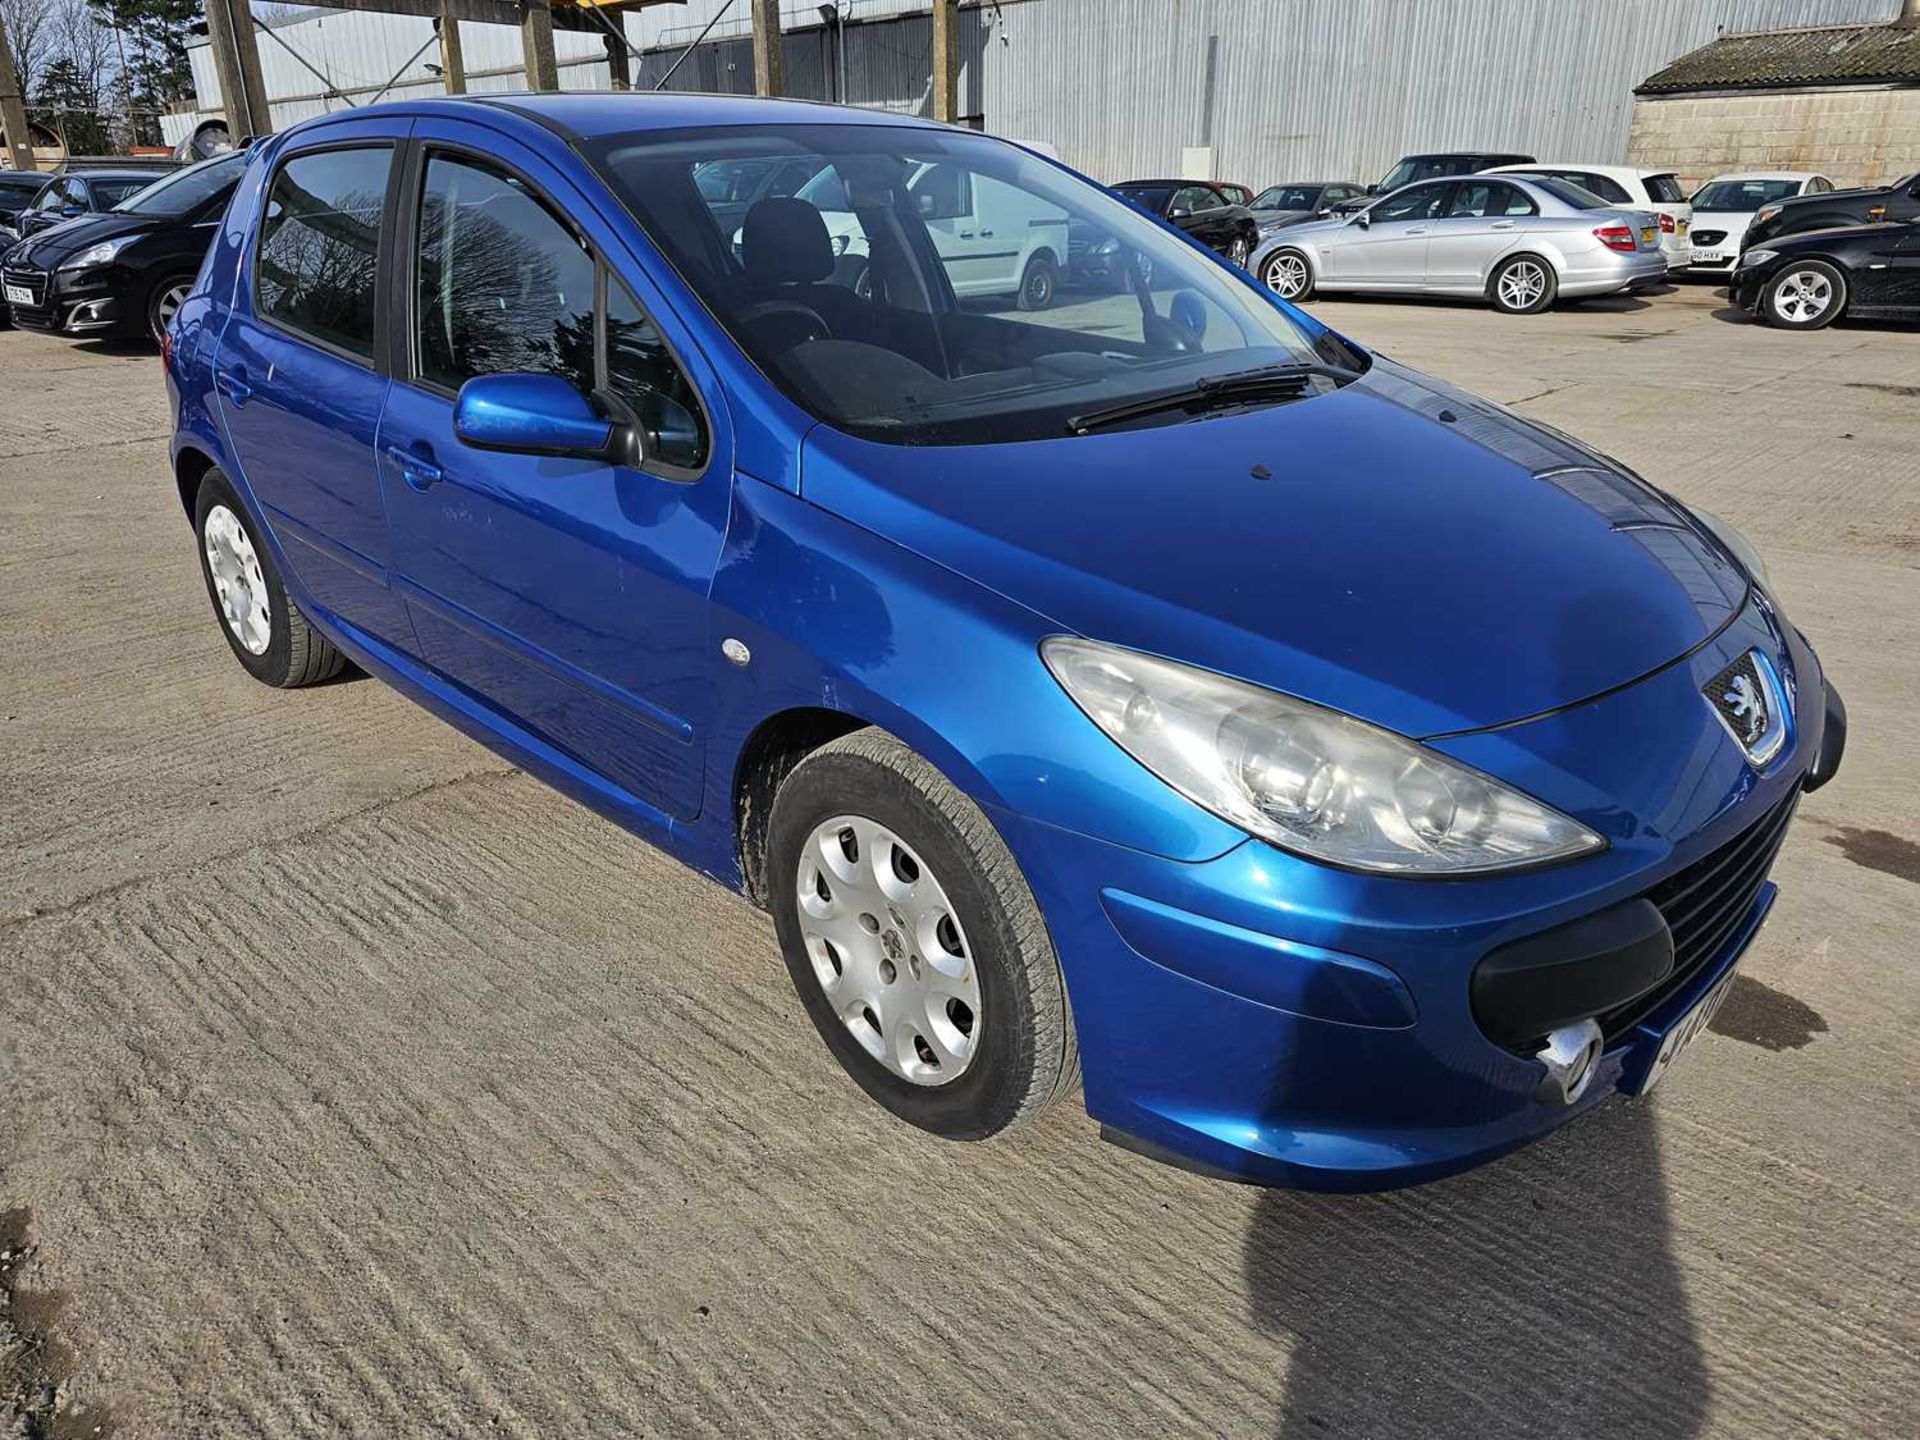 2007 Peugeot 307 X-line, 5 Speed, A/C (Reg. Docs. & Service History Available, Tested 07/24) - Image 6 of 28